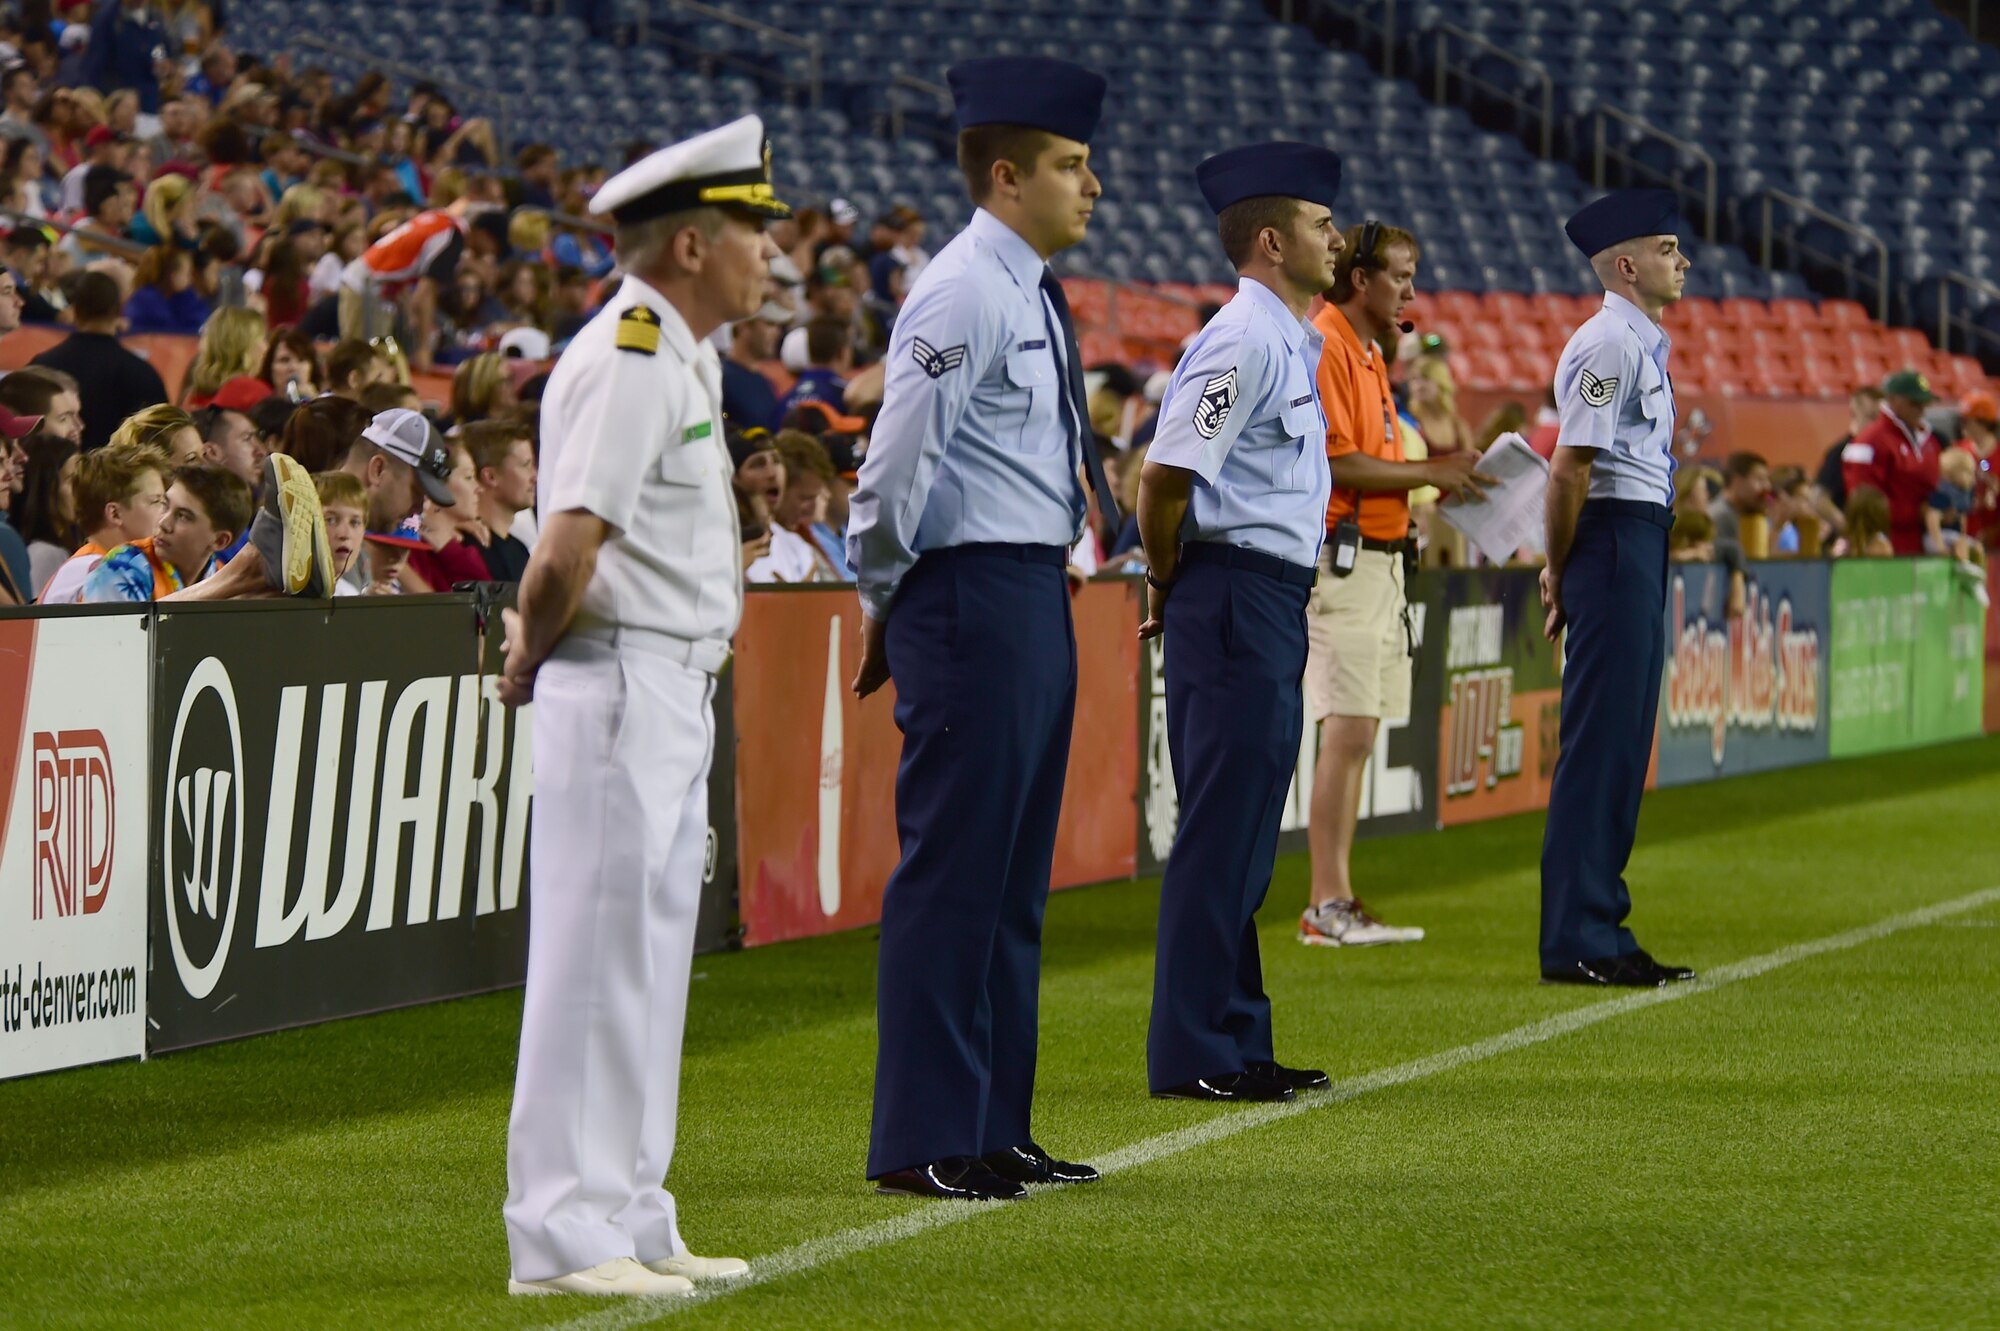 Military members line up to be honored after the Major League Lacrosse game between the Denver Outlaws and the Boston Cannons July 4, 2015, at Sports Authority Field at Mile High Stadium in Denver. The Outlaws honored military members with a standing ovation and video tribute at the end of the game. (U.S. Air Force photo by Airman 1st Class Luke W. Nowakowski/Released)